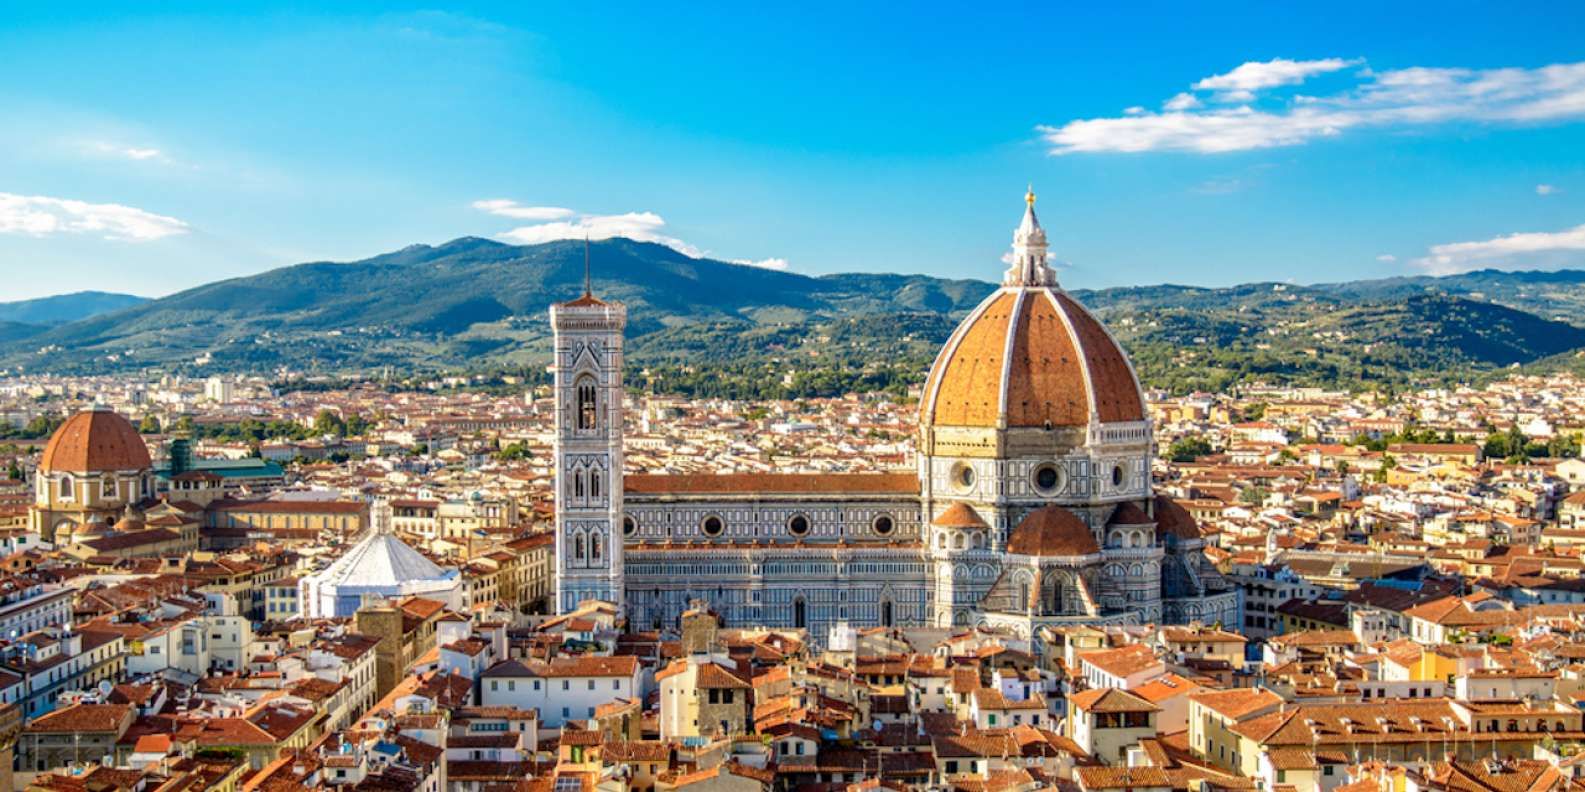 Florence skyline with the Duomo's red dome and Giotto's Campanile, amidst city and Tuscan hills.